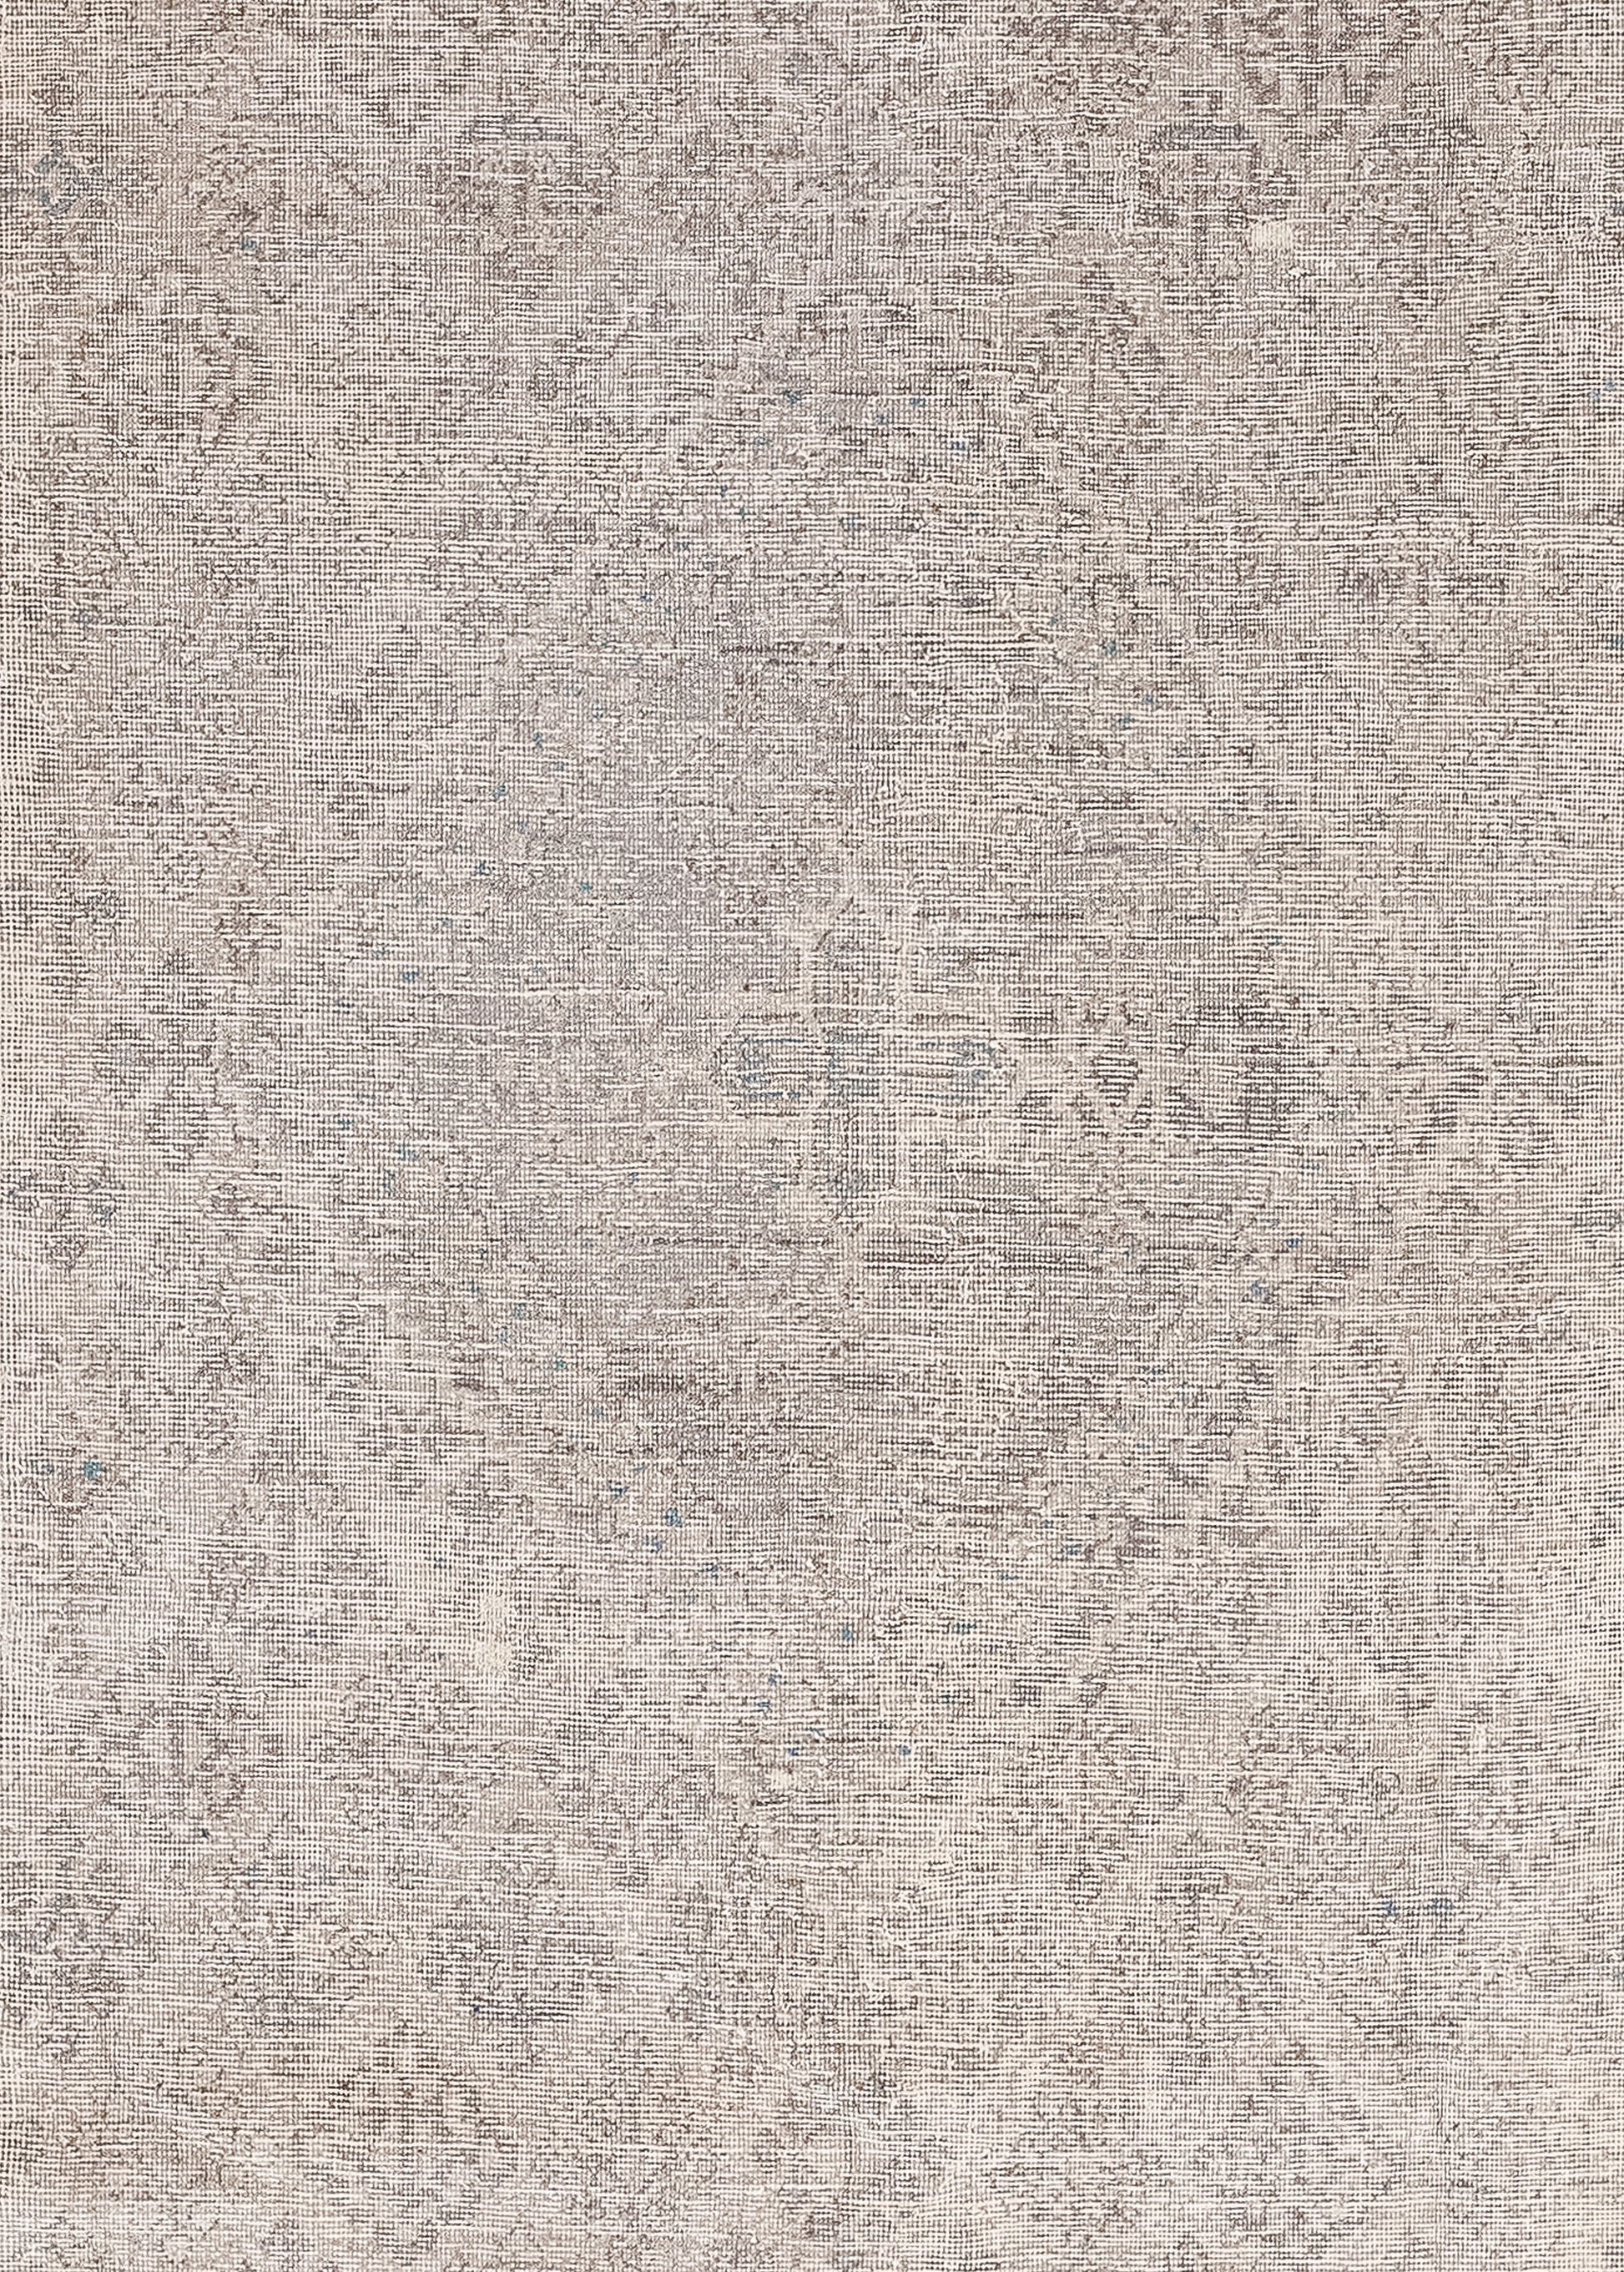 The foreground of the rug features a large rhombus that has a central nested cross, and the surrounding comes with a smaller diamond-shaped pattern.